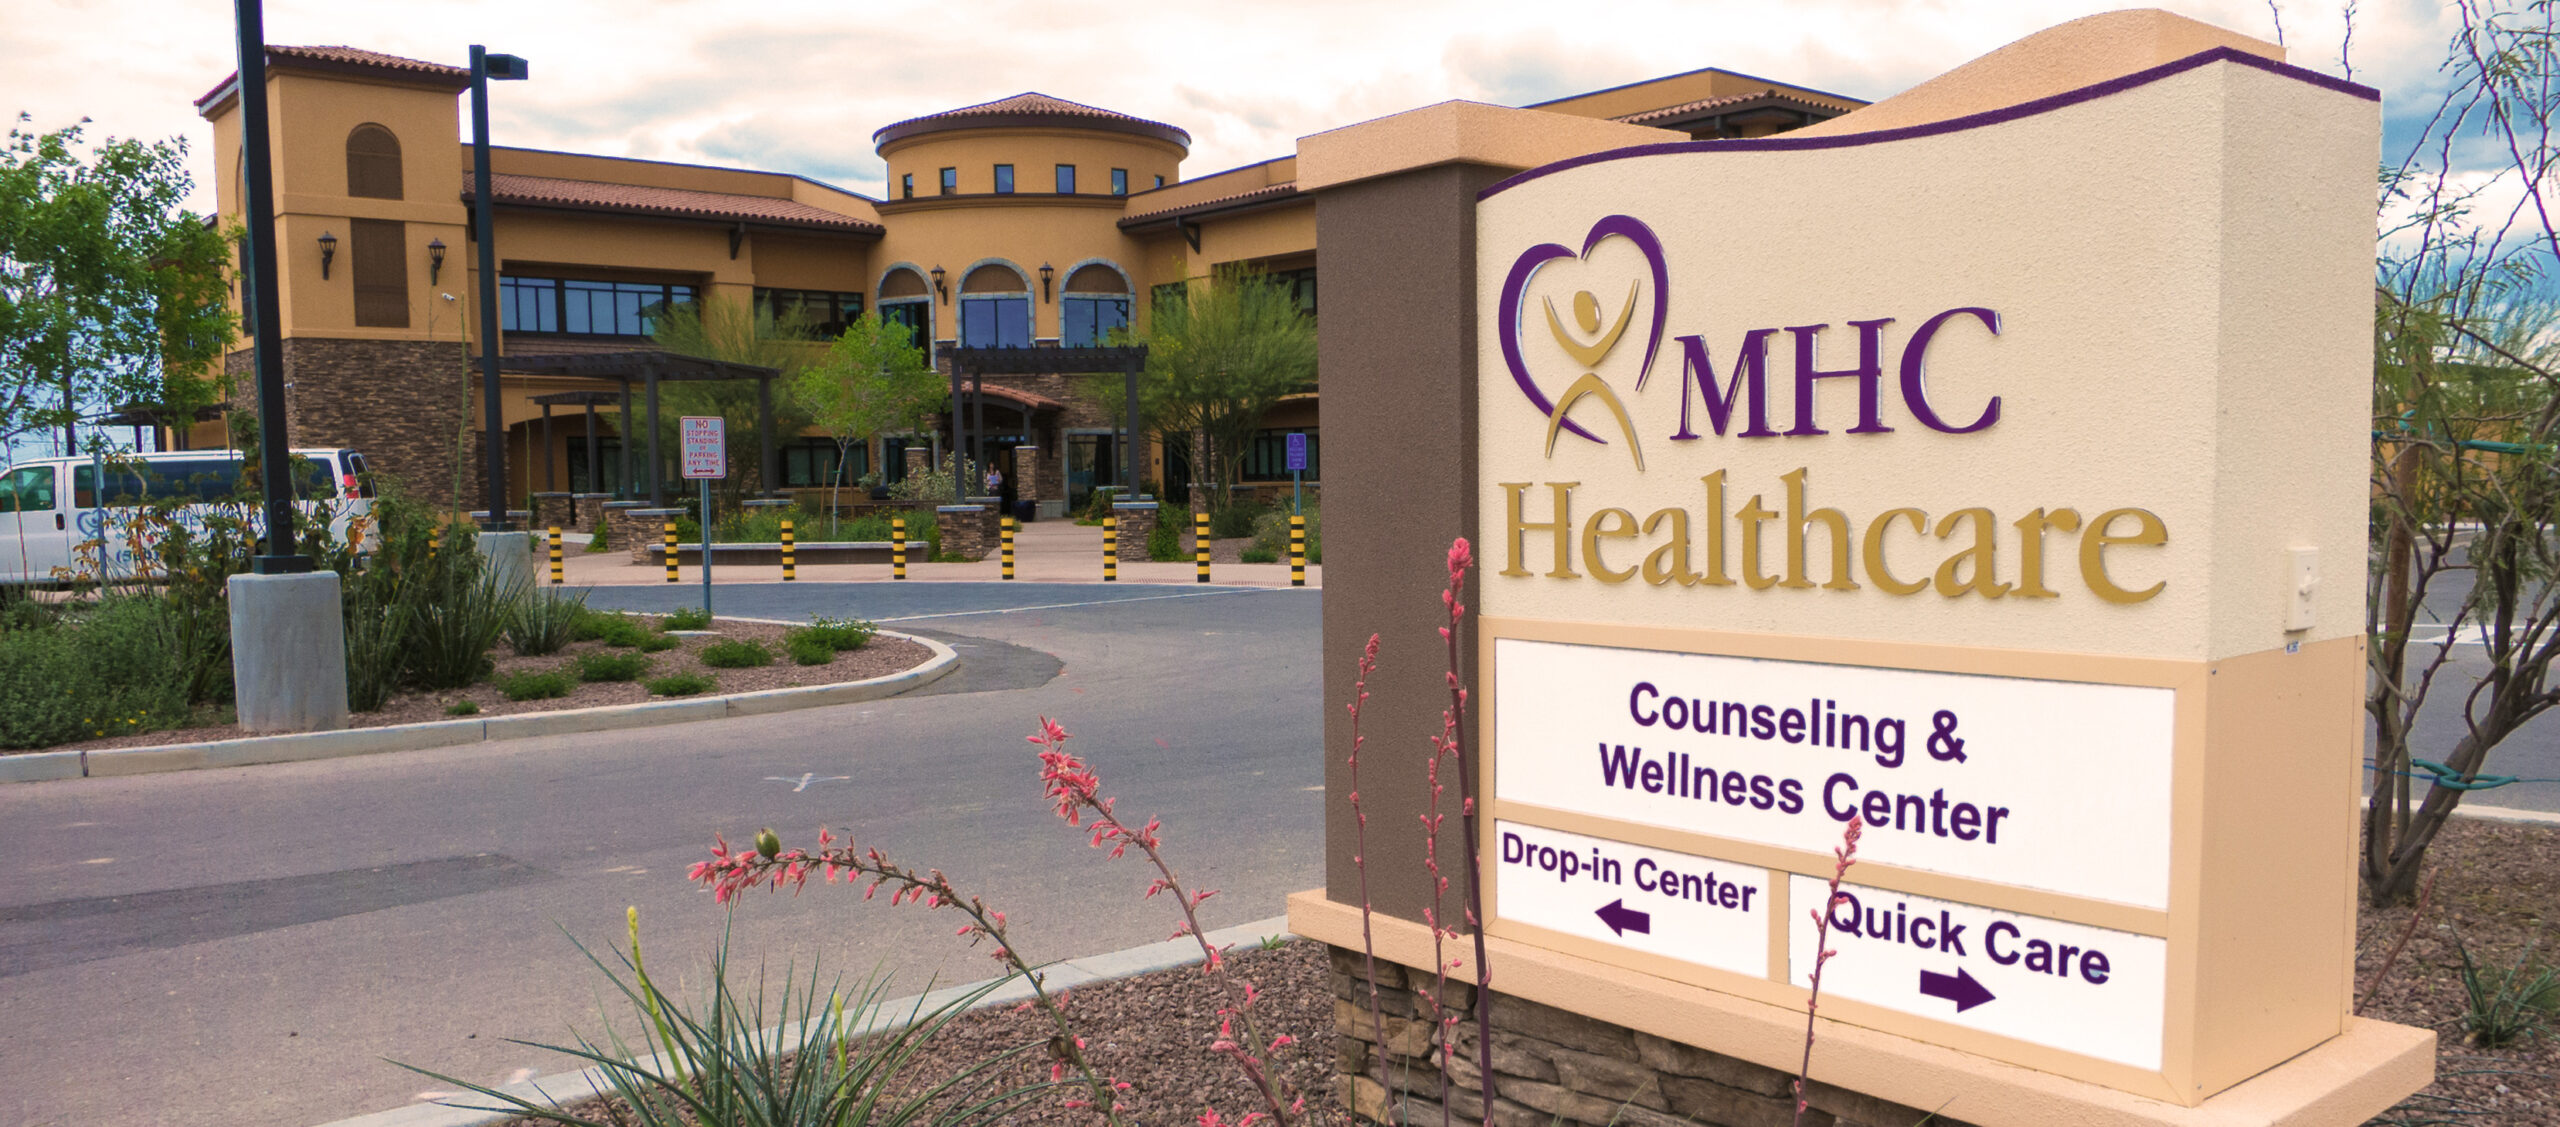 MHC Healthcare - Counseling & Wellness Center